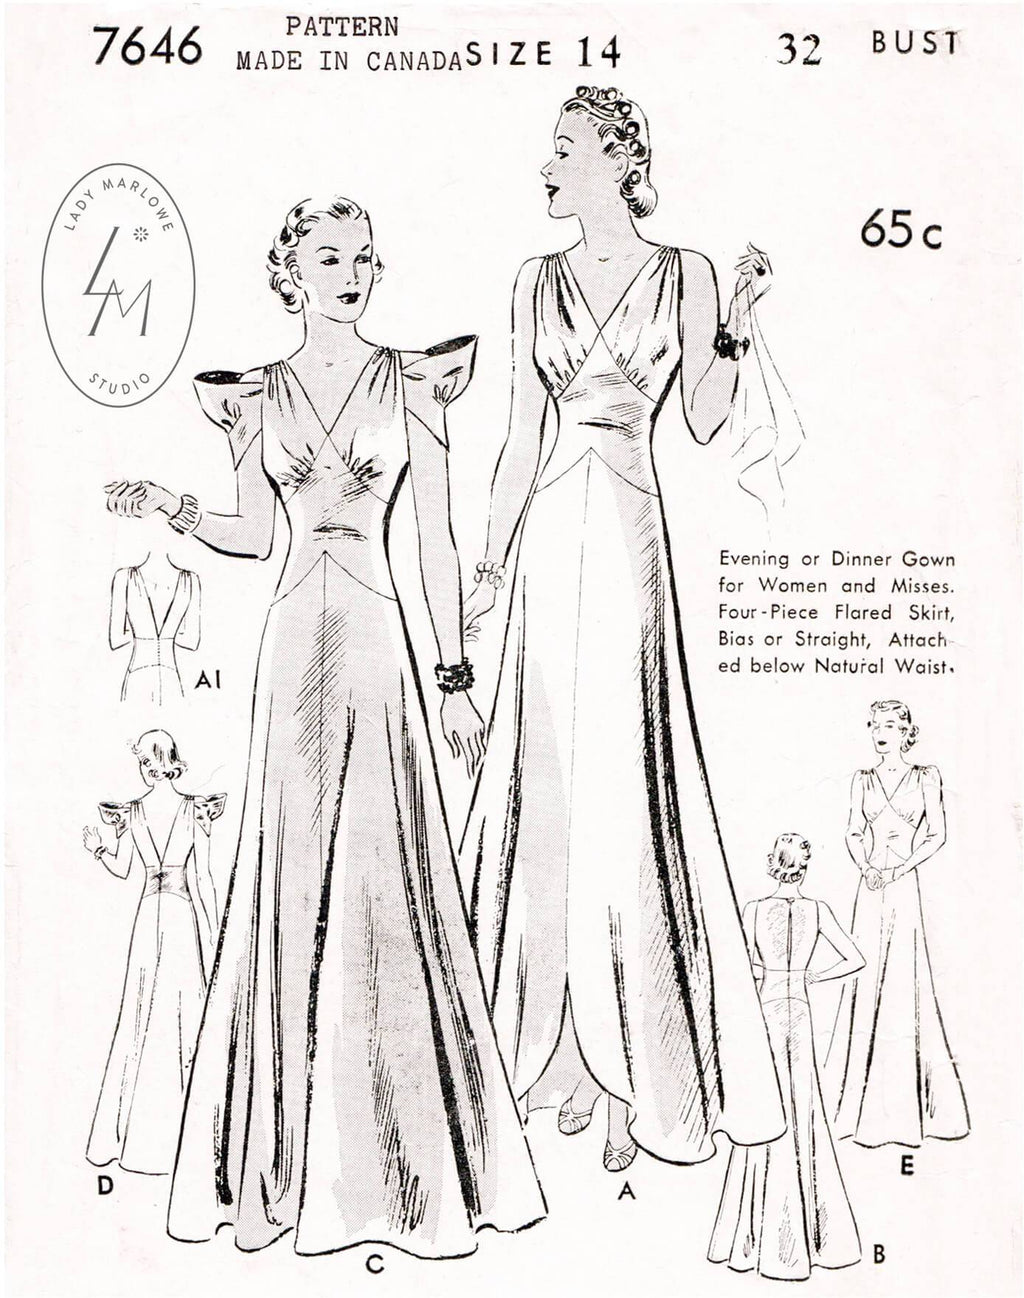 Vintage 1930s Formal, Party Dresses History